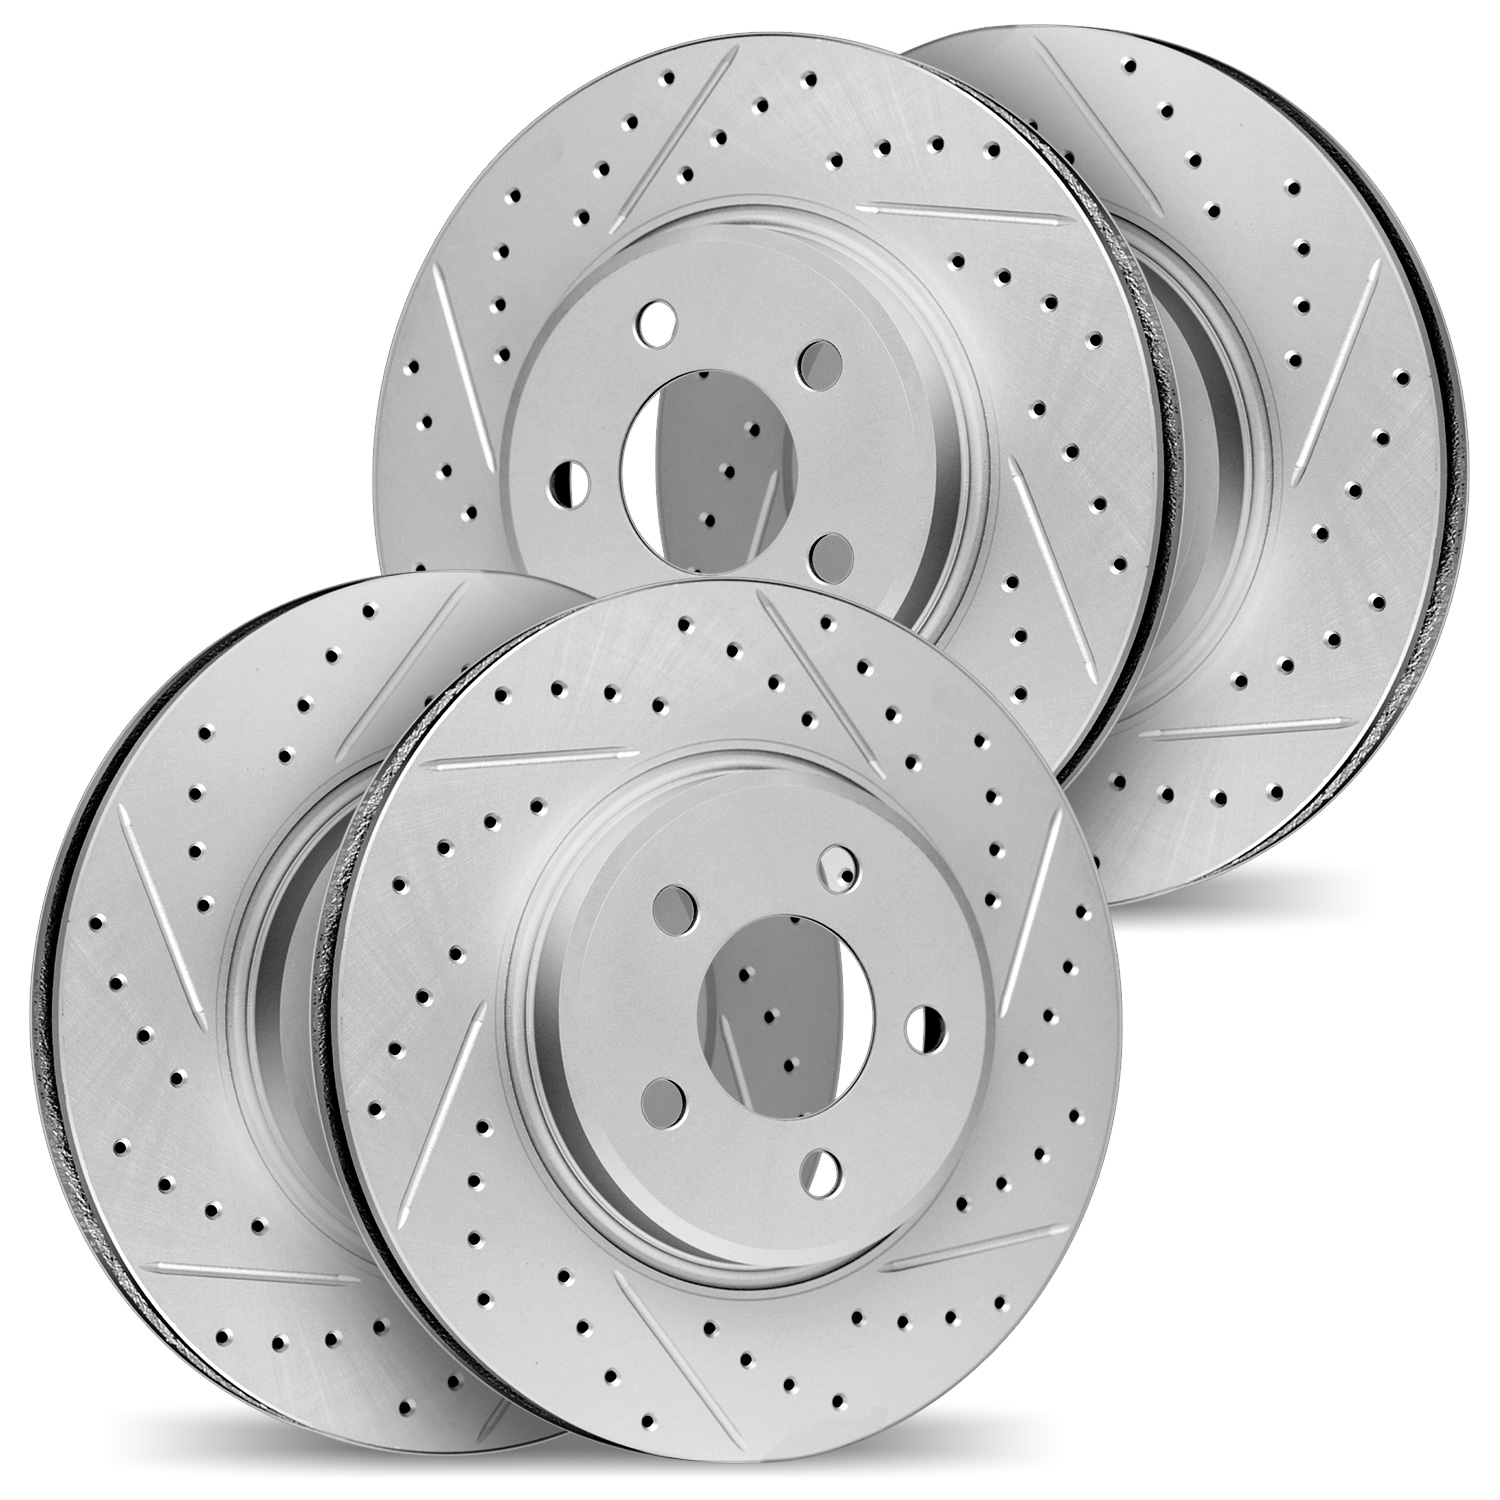 2004-02001 Geoperformance Drilled/Slotted Brake Rotors, 1969-1983 Porsche, Position: Front and Rear